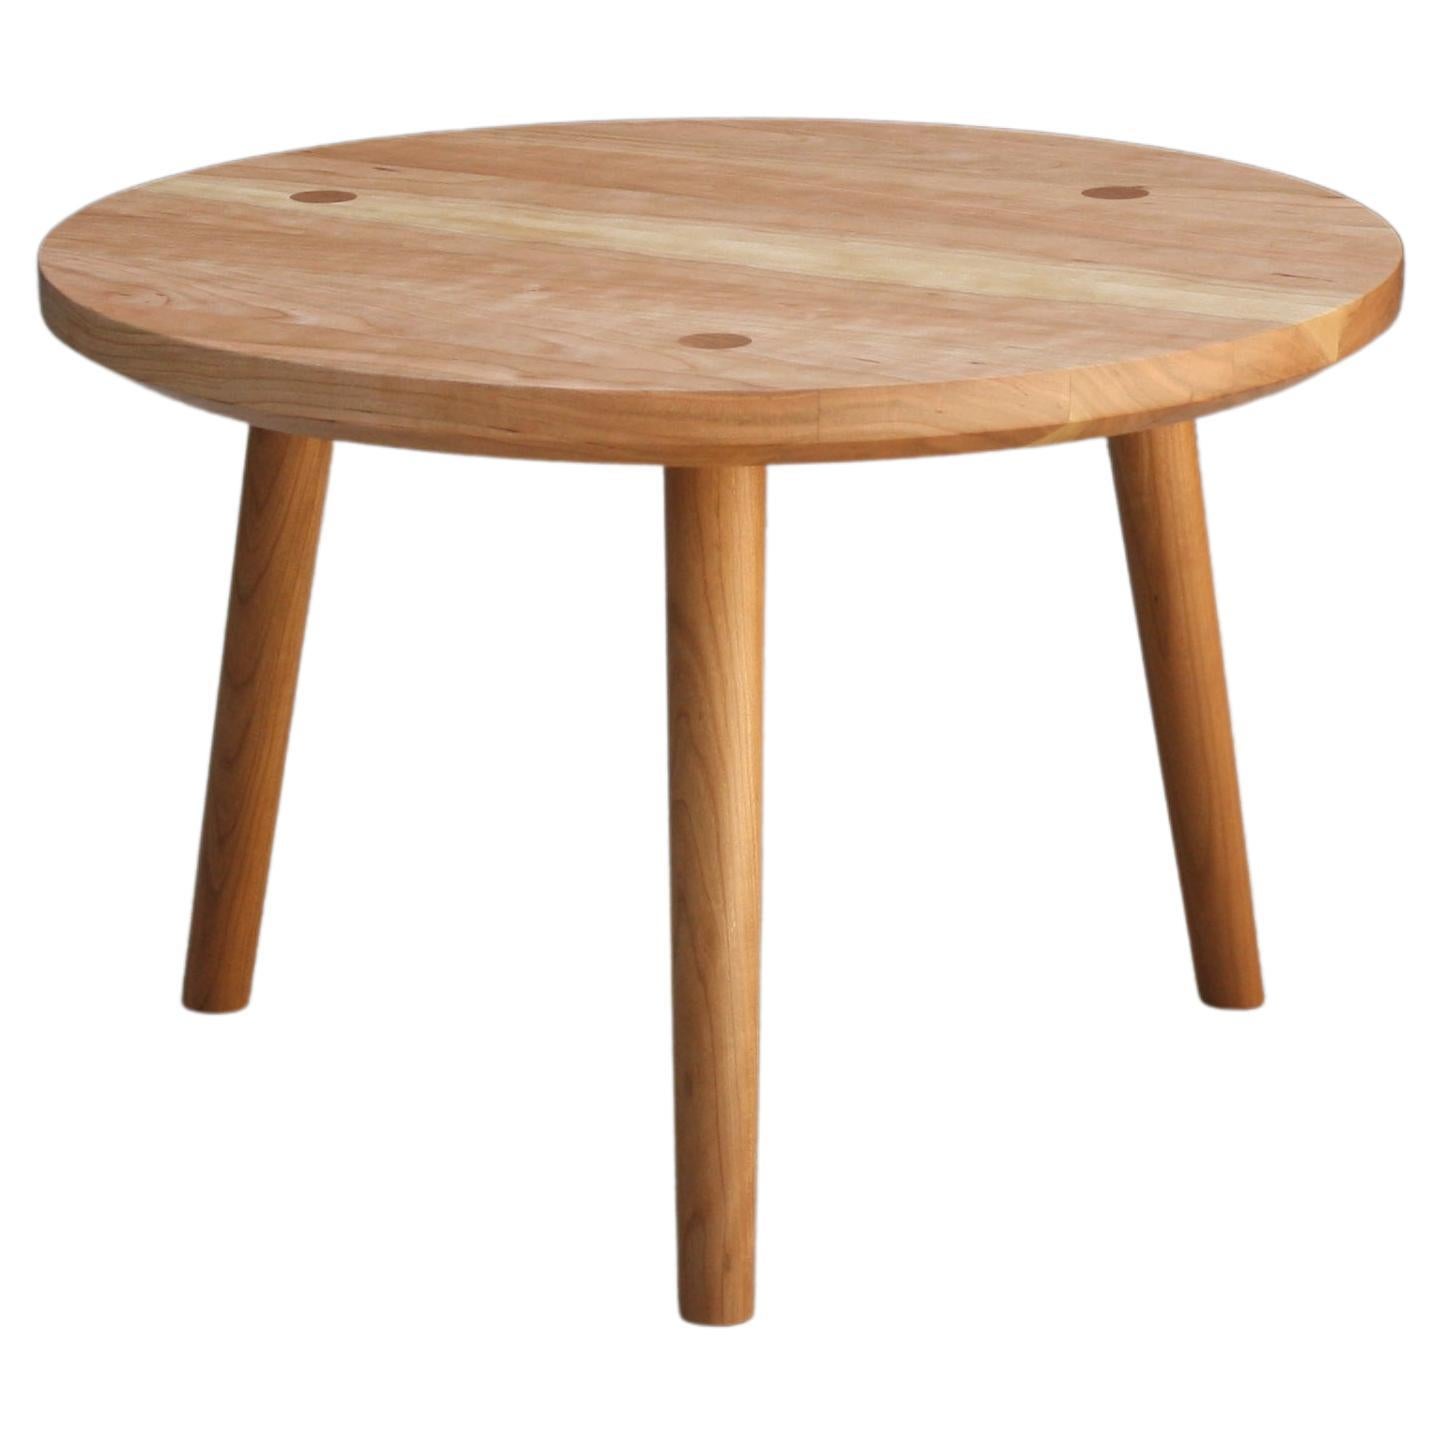 Bare a Handmade Wood Table by Laylo Studio